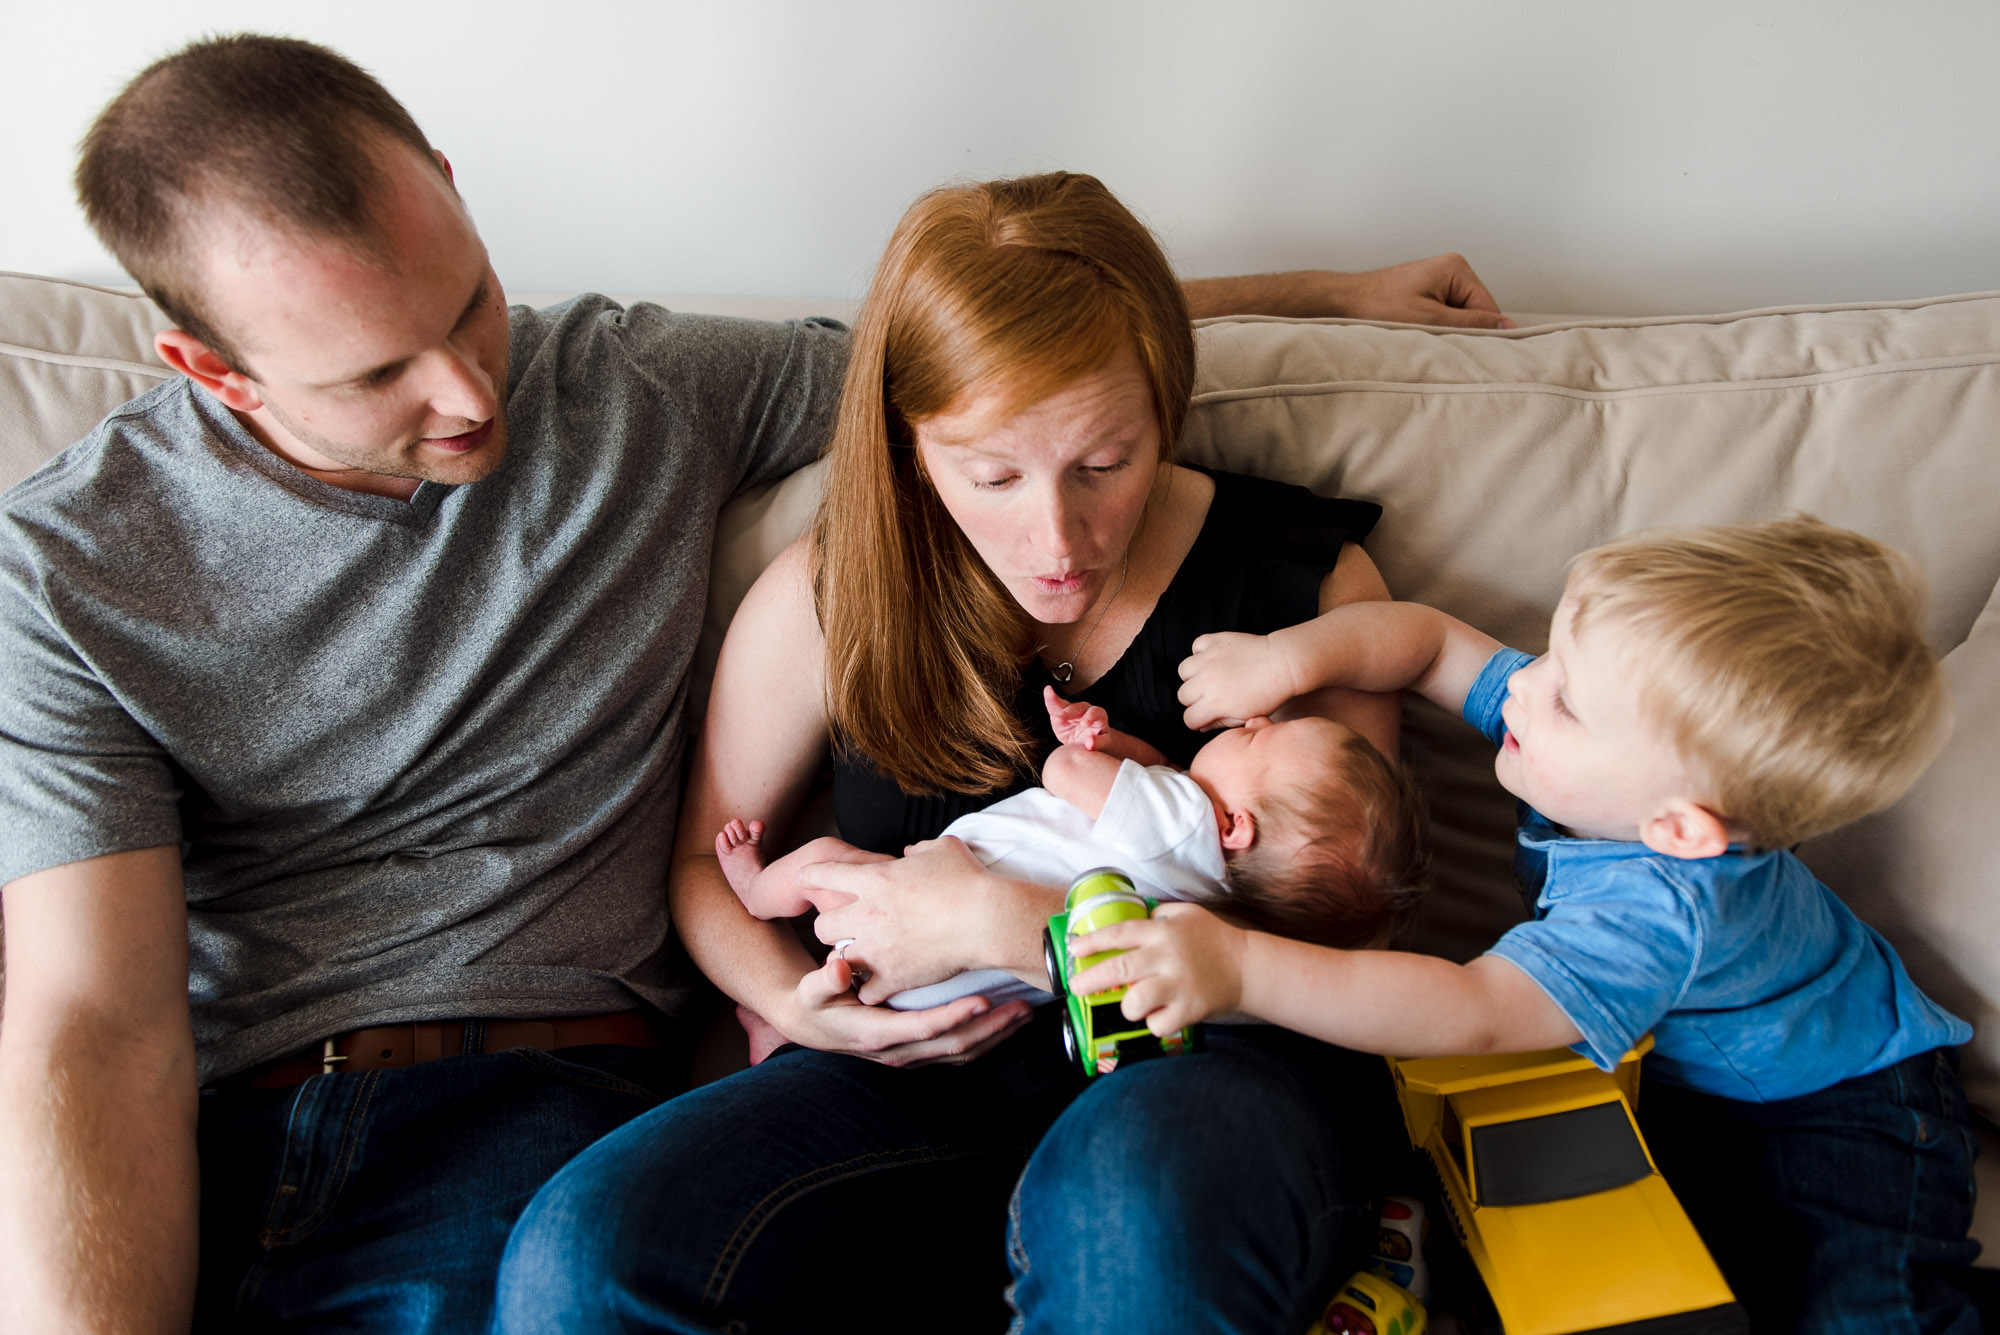 A sherwood Park family sits with their newborn baby daugthter